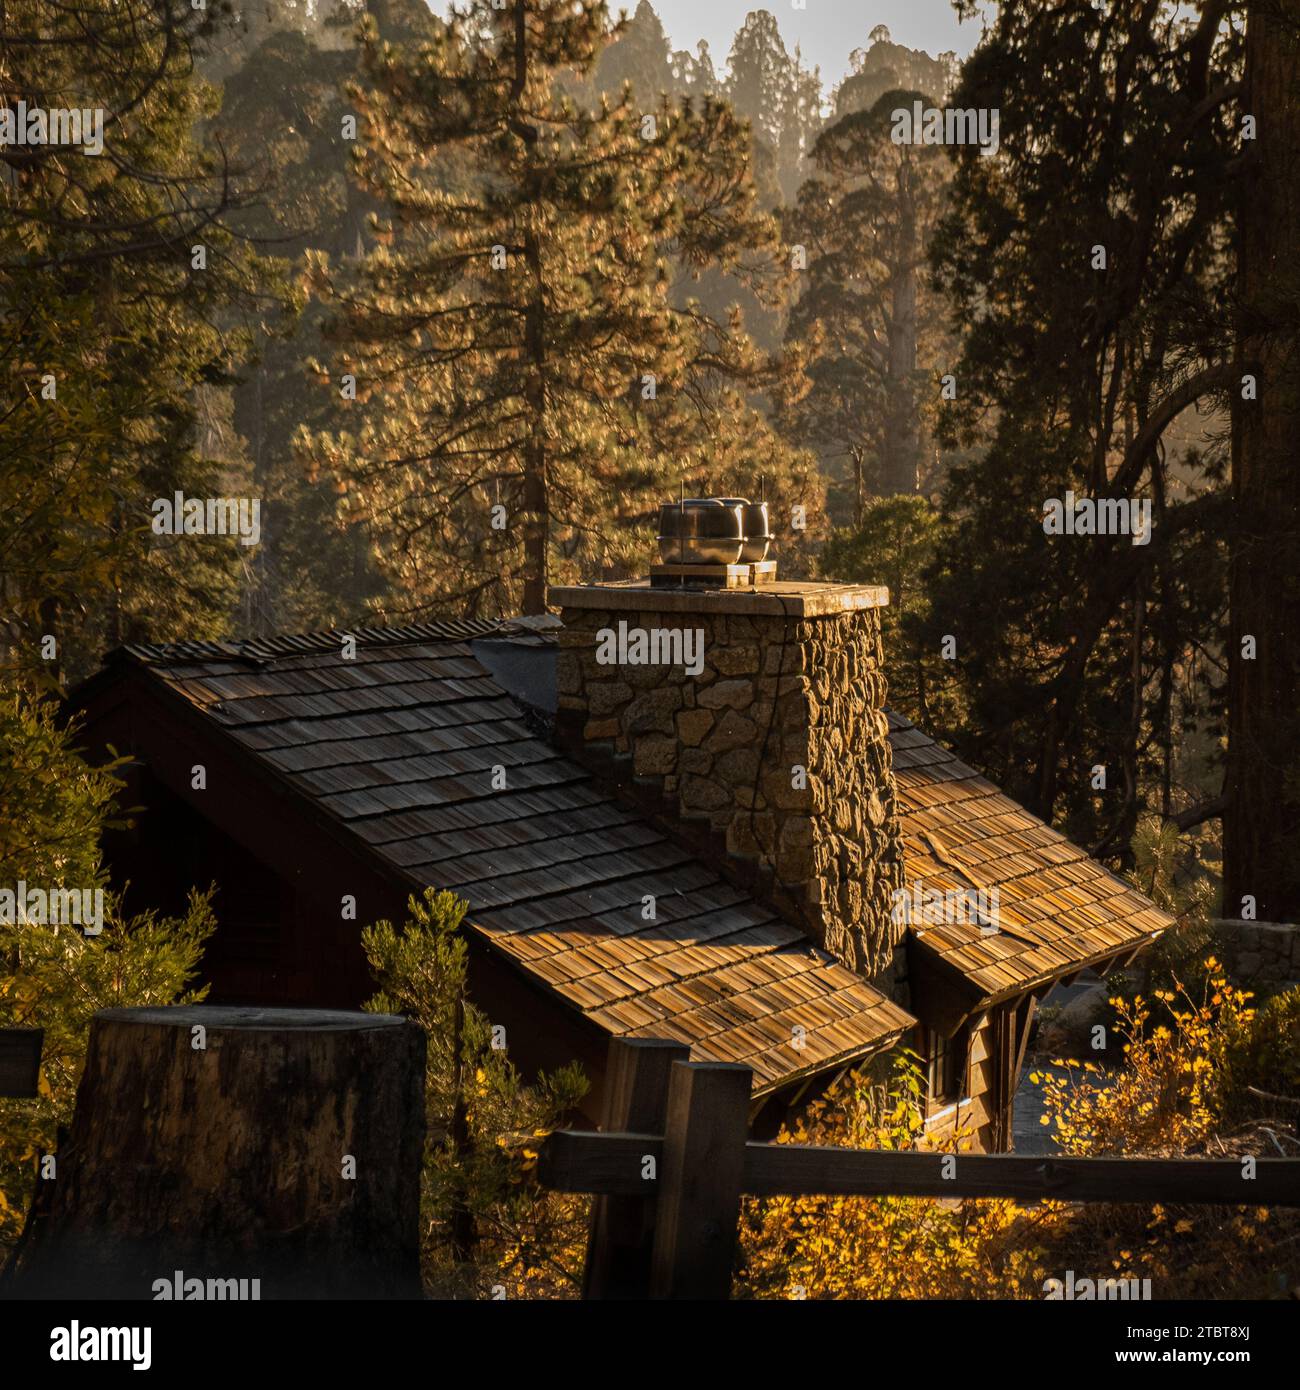 A little cottage sitting alone in a west coast forest at golden hour Stock Photo